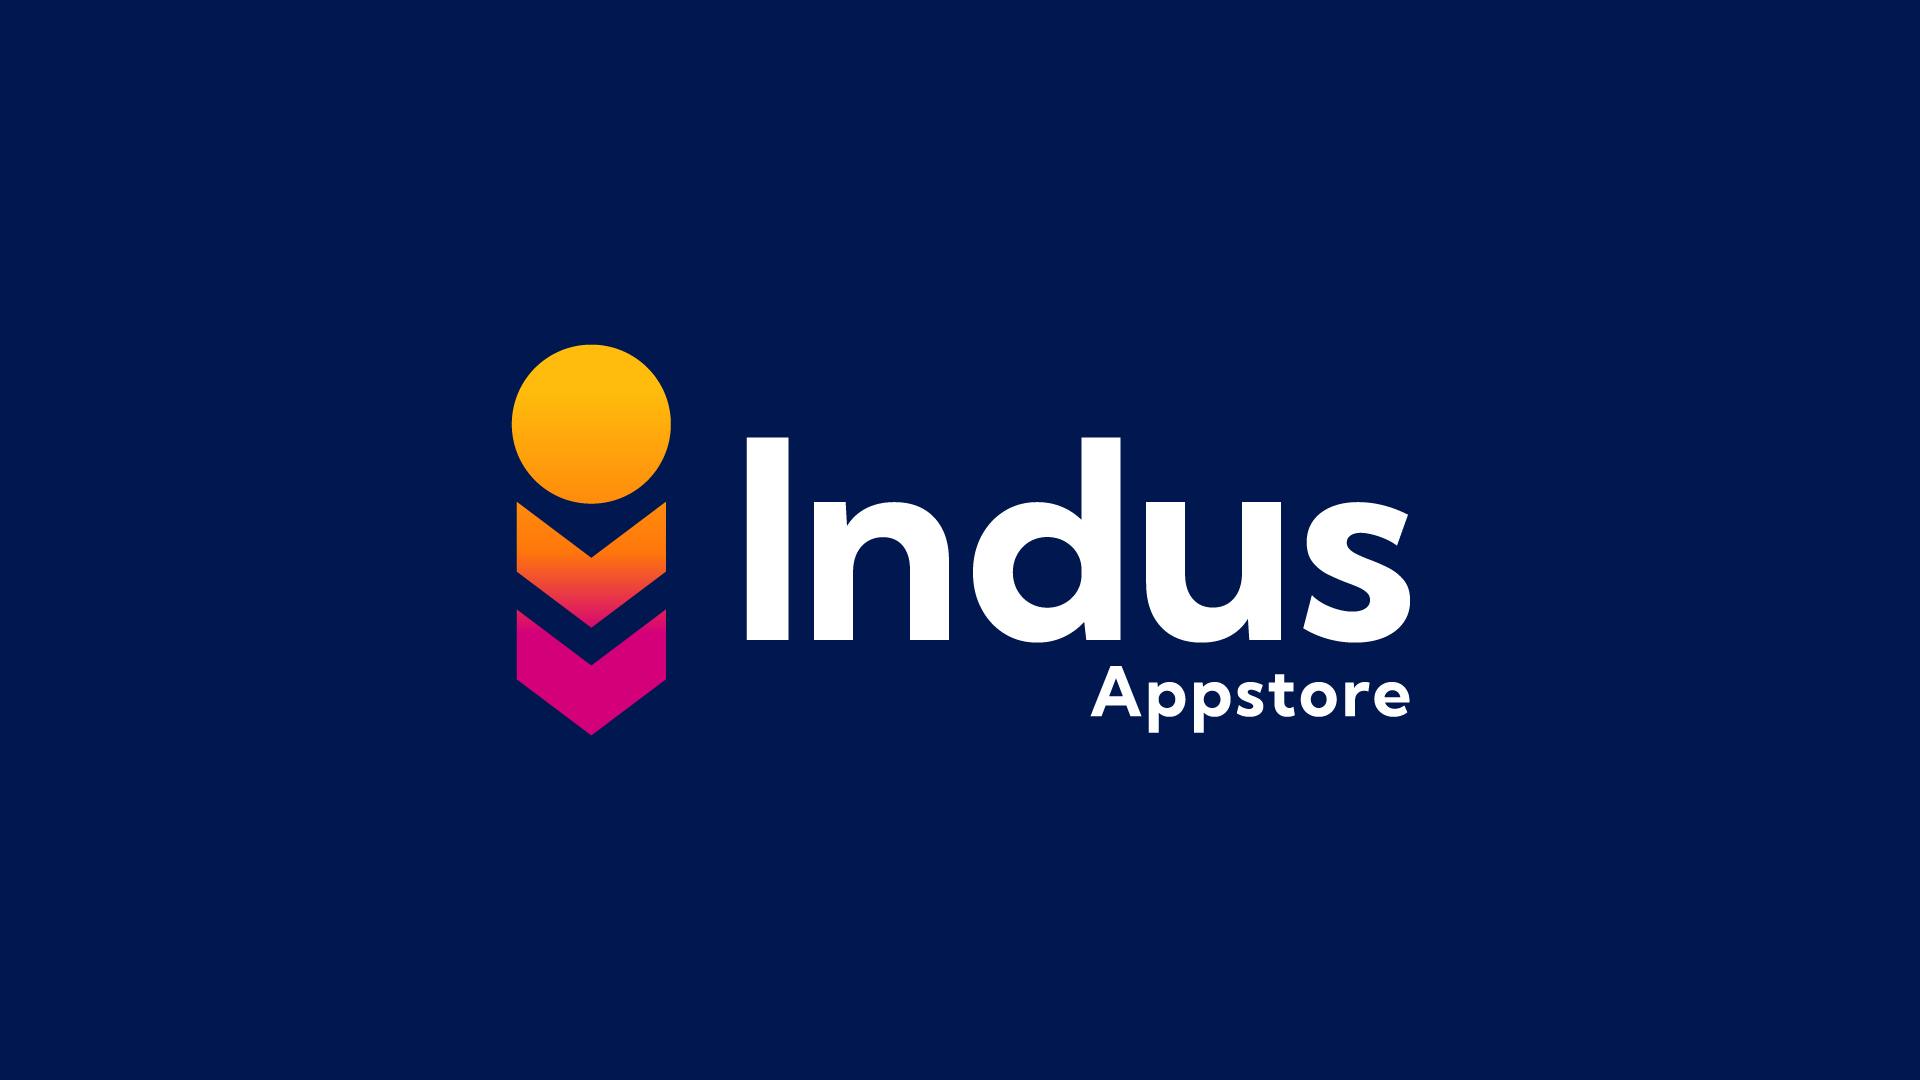 PhonePe launches Indus Appstore with focus on Indian languages, gaming